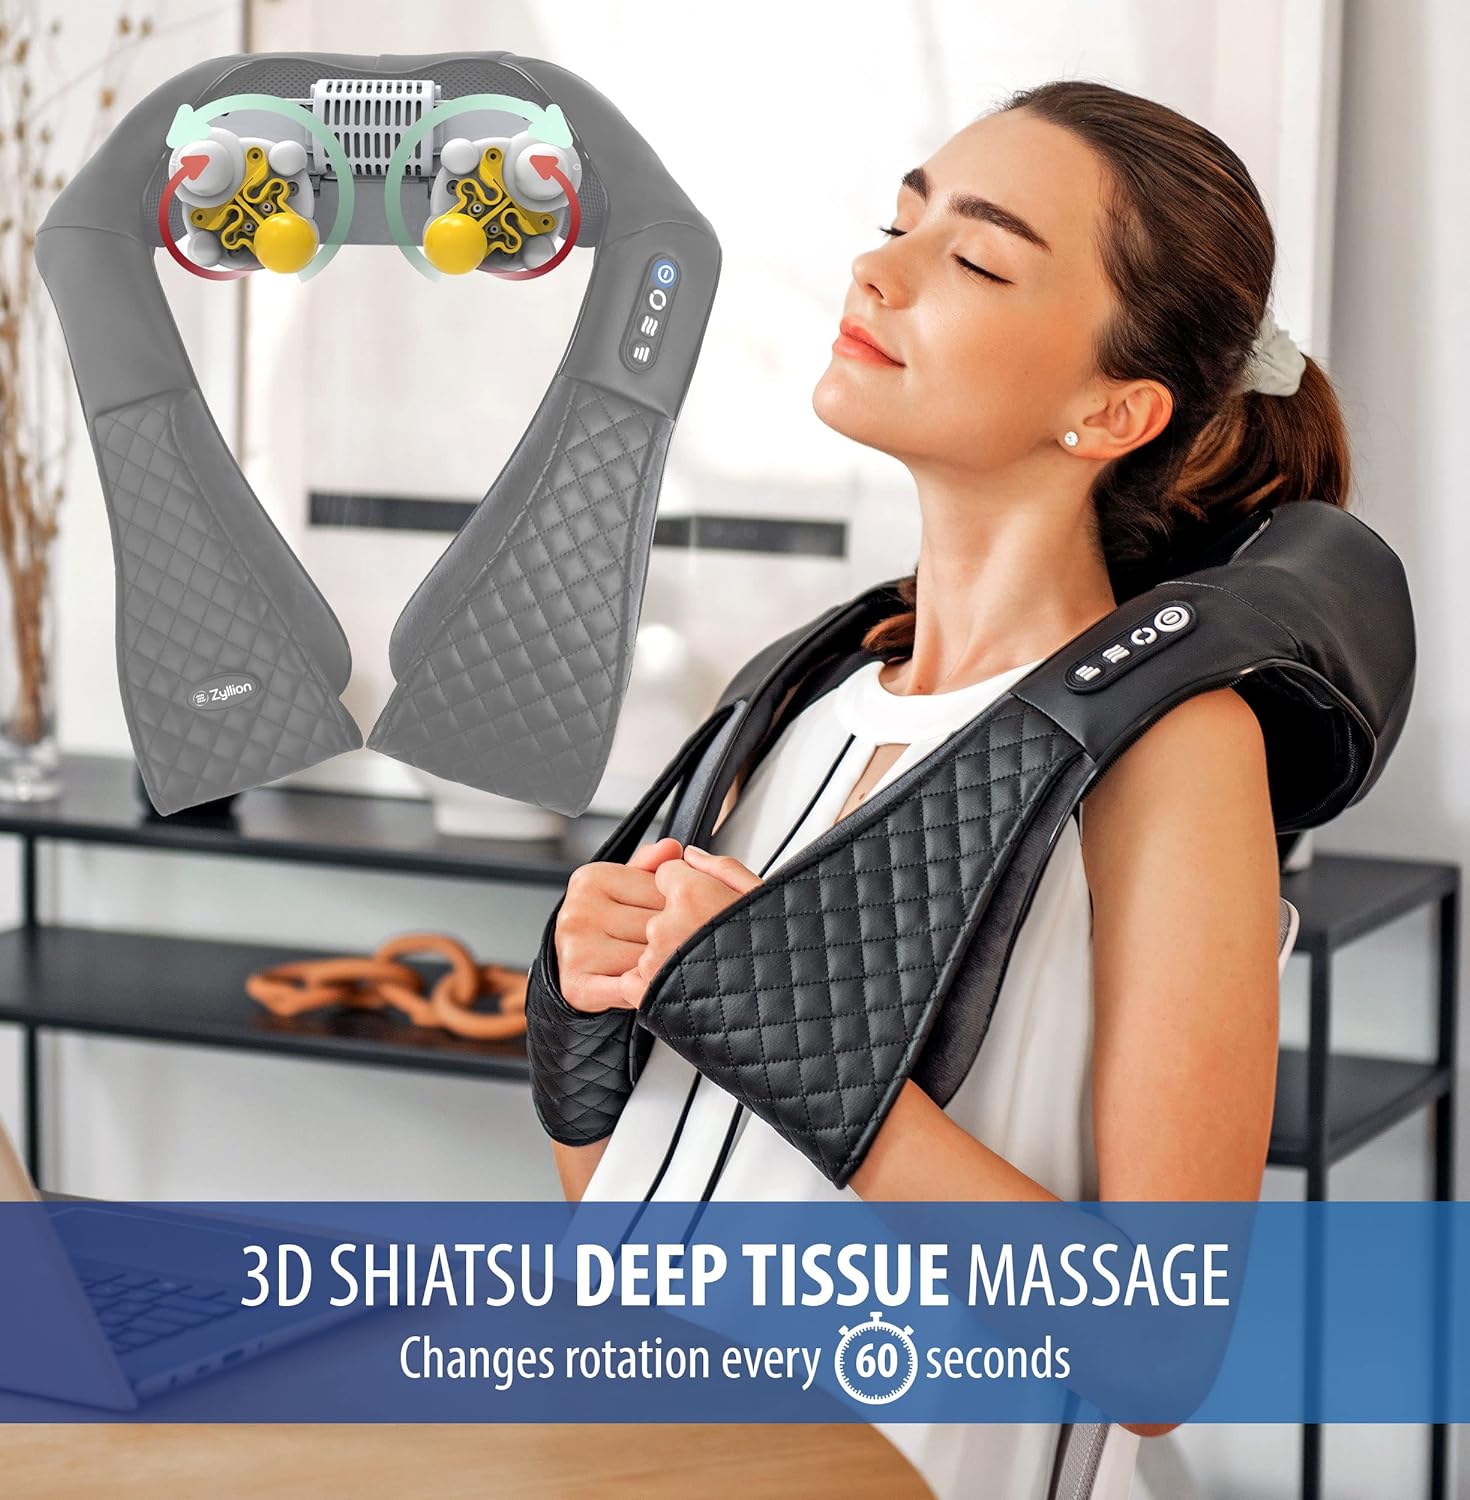 Zyllion Shiatsu Neck and Back Massager with Heat - Cordless Rechargeable 3D Kneading Deep Tissue Massage for Muscle Pain Relief on Shoulders, Legs, Foot - Black (ZMA-28RB)